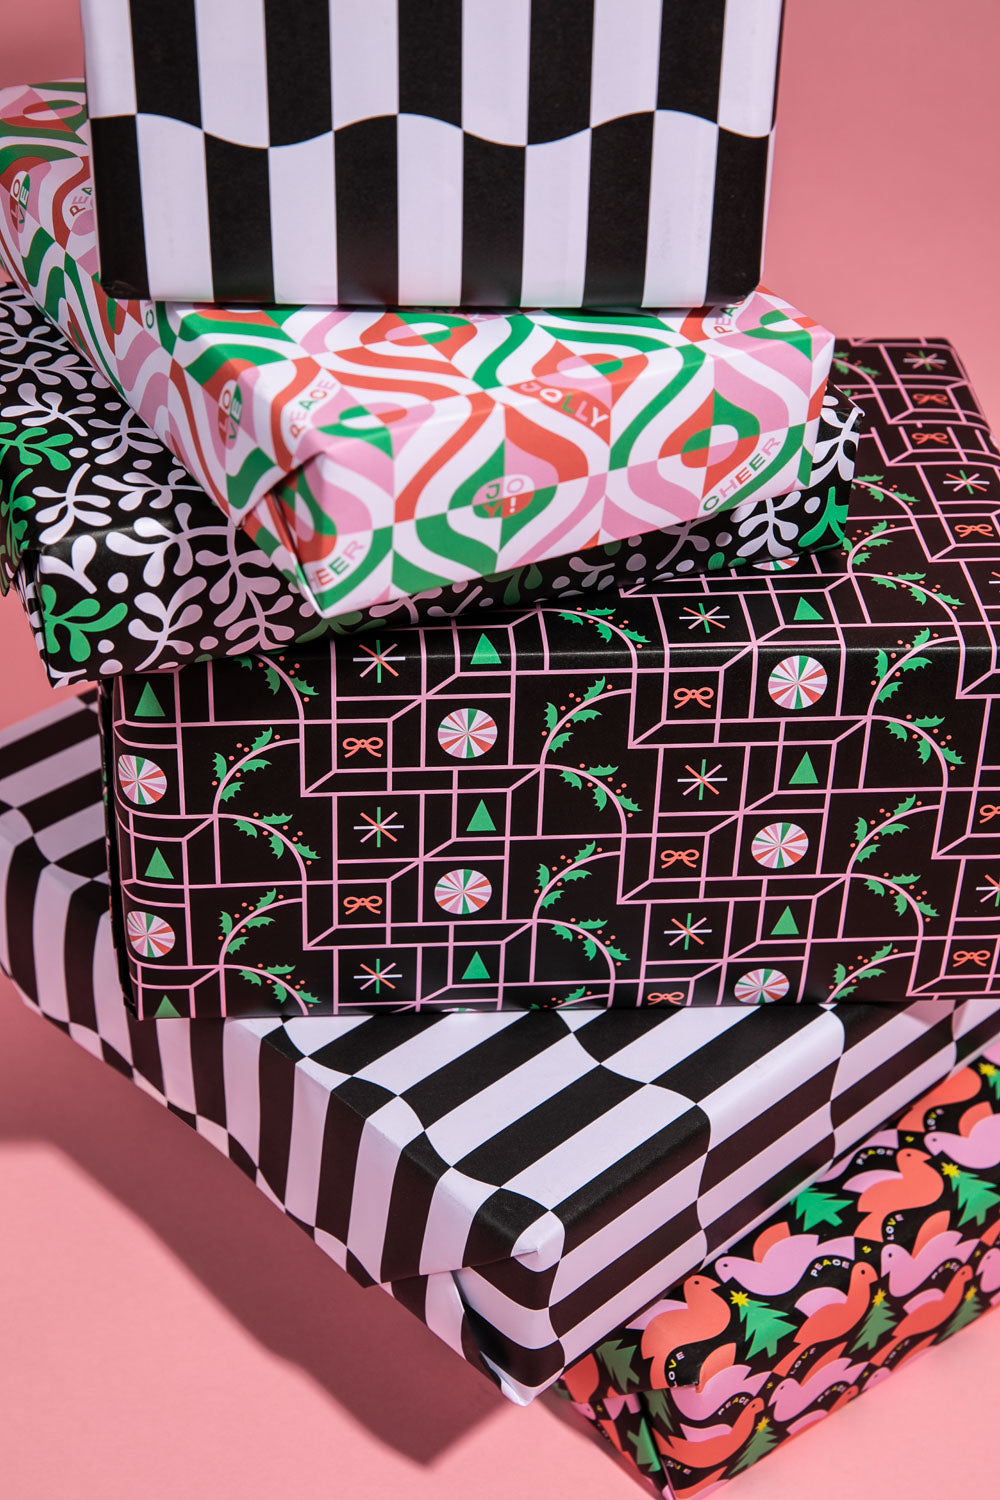 Stack of presents wrapped in mid-century inspired Christmas gift wrap in modern retro patterns.